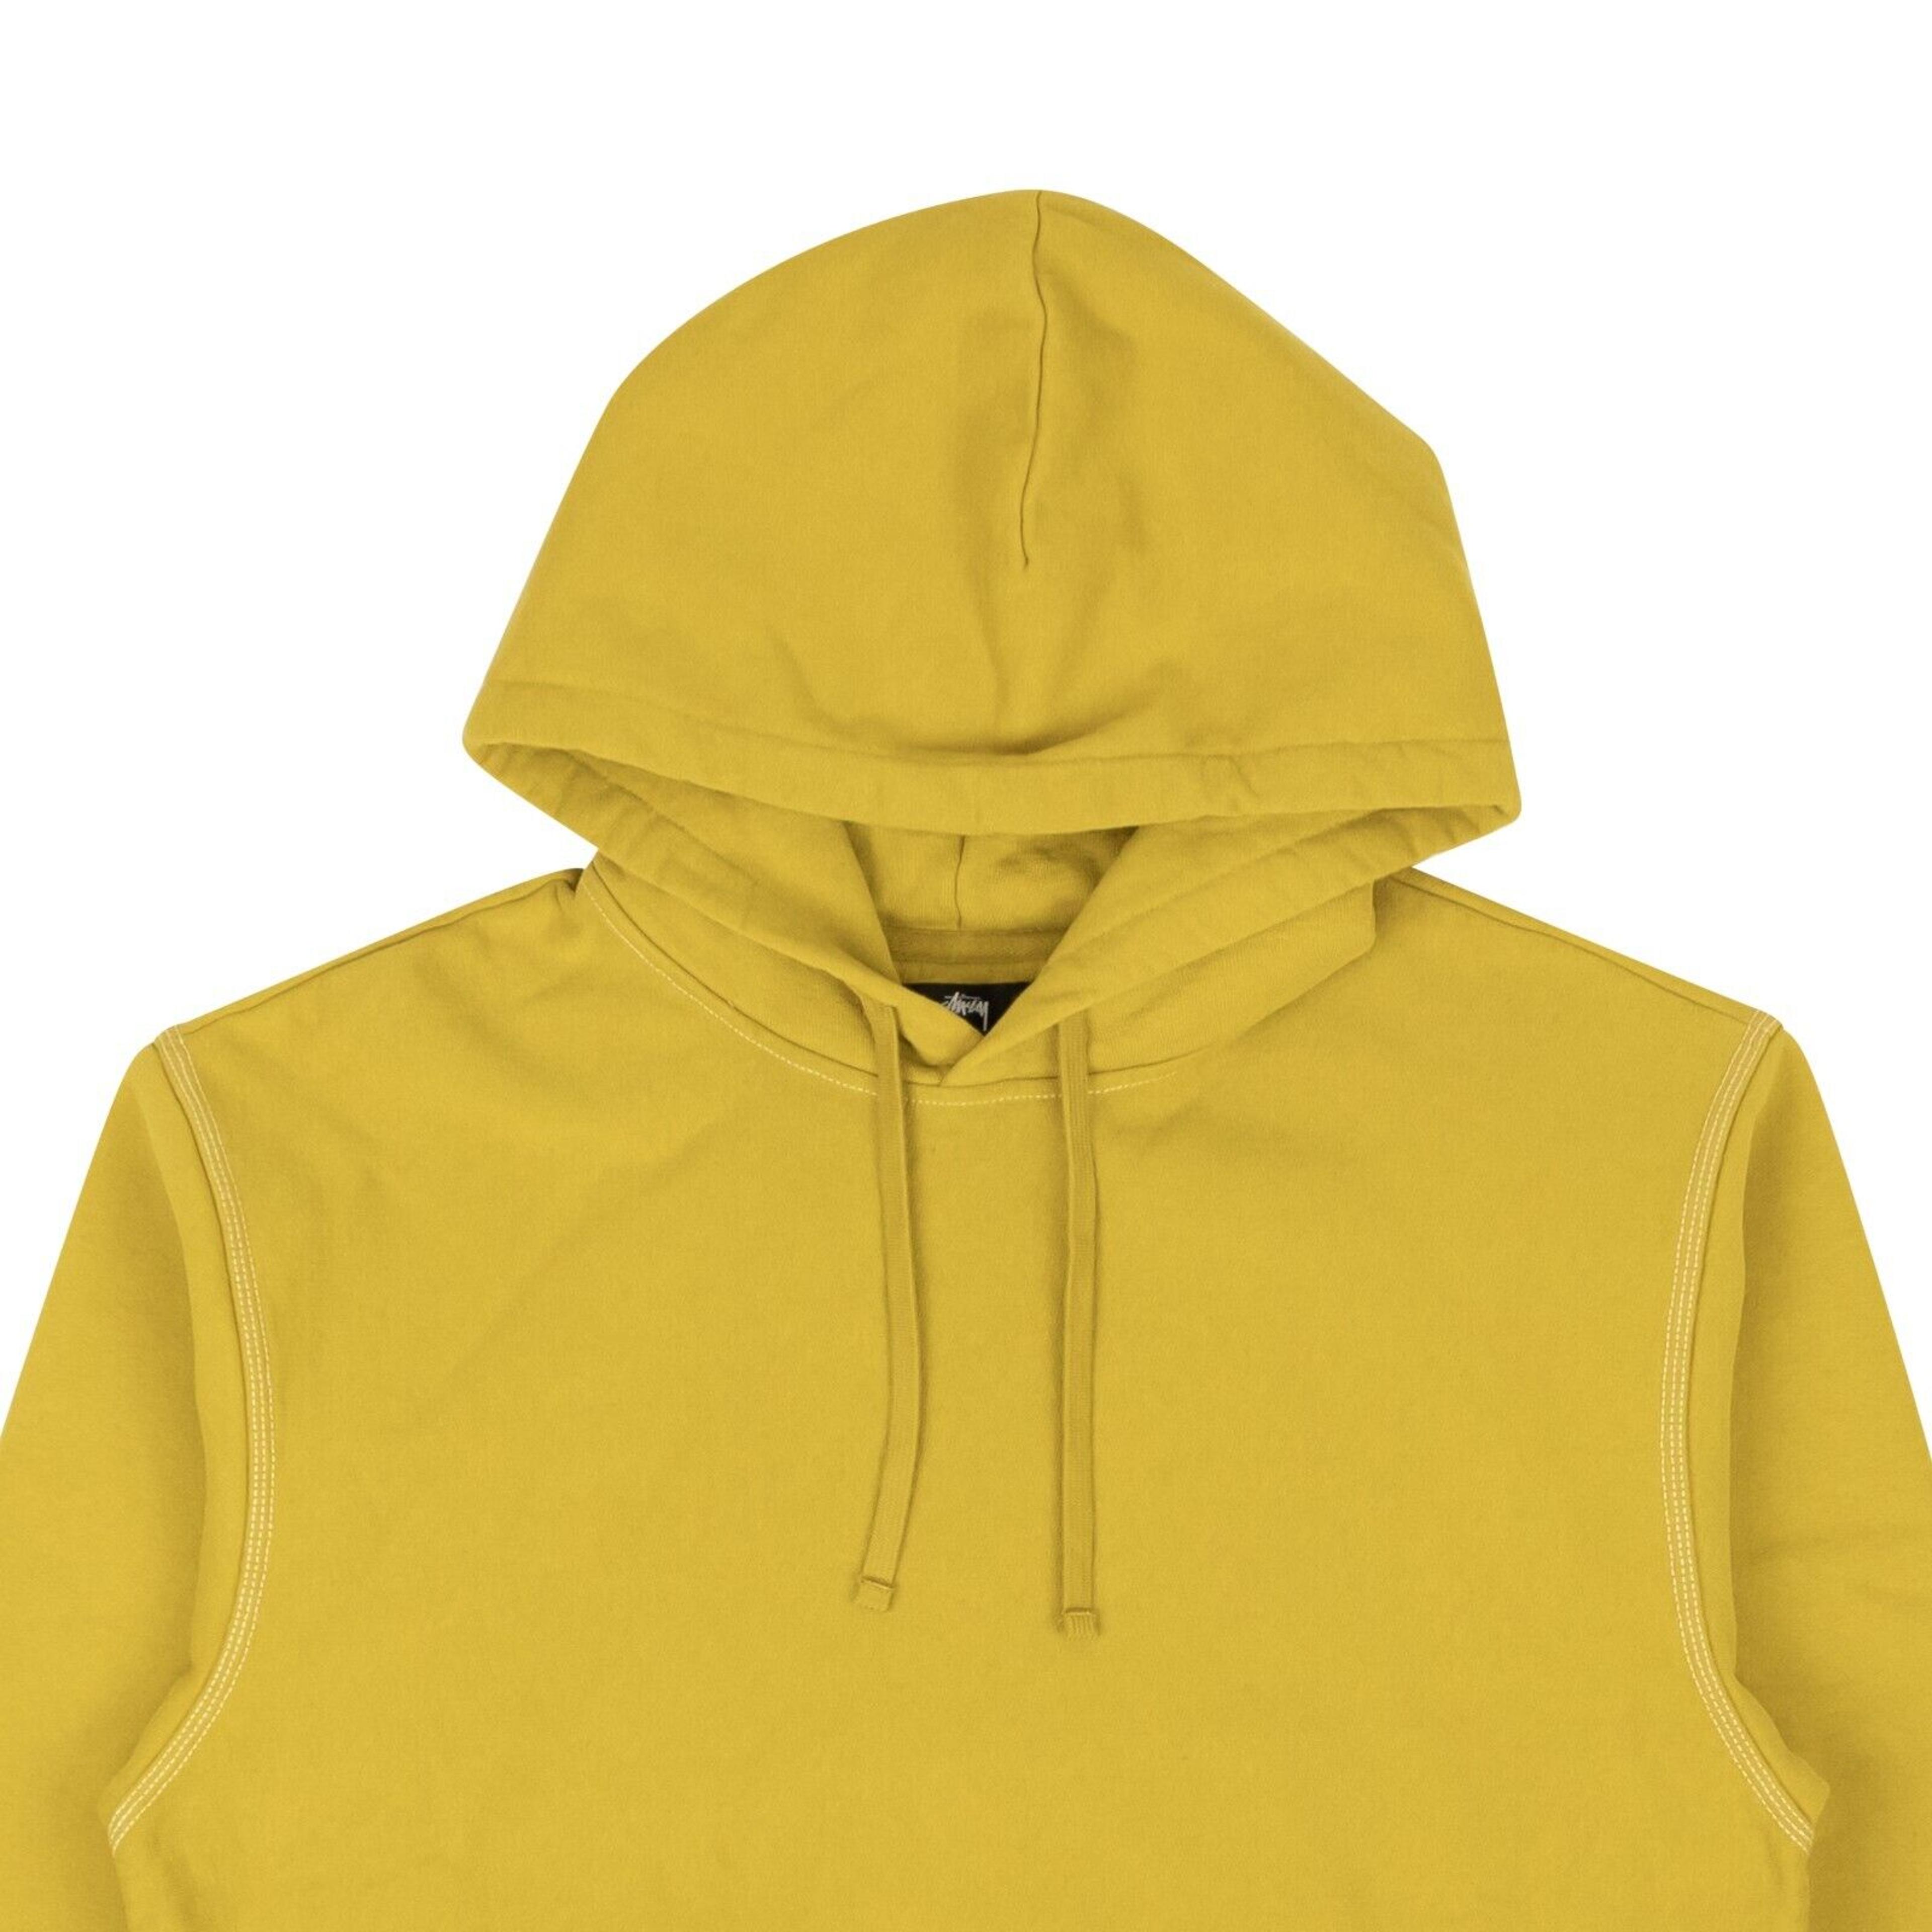 Alternate View 1 of Stussy Contrast Stitch Label Hoodie - Gold